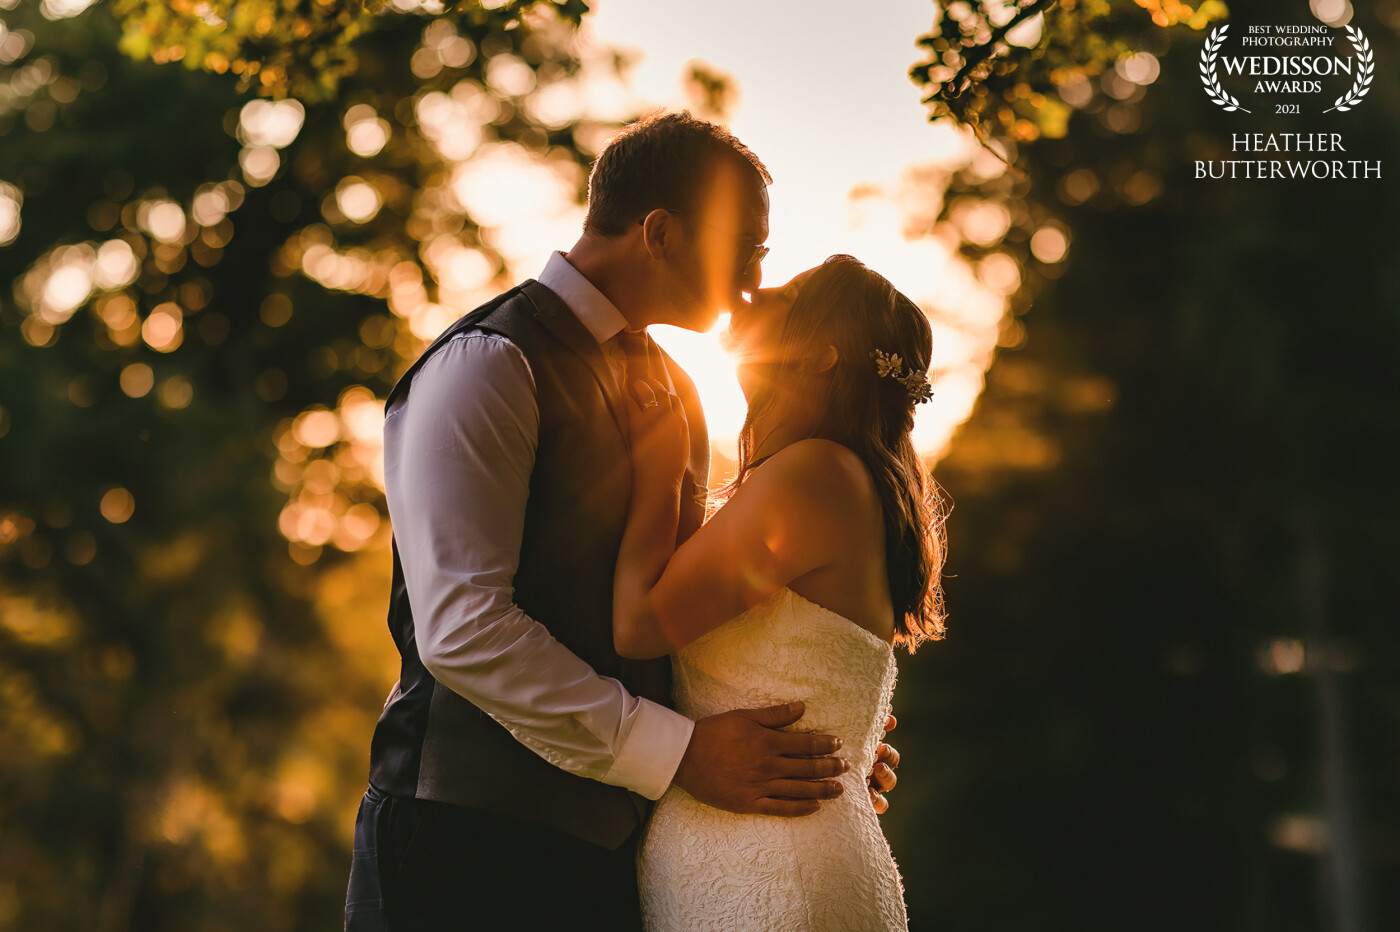 Laura and Andy's beautiful wedding day at Bowcliffe Hall in Yorkshire finished with a stunning golden sunset after a cloud filled day. Laura was game for climbing over a gate and into a field filled with sheep to get this photo just before the sunset and it was totally worth it!